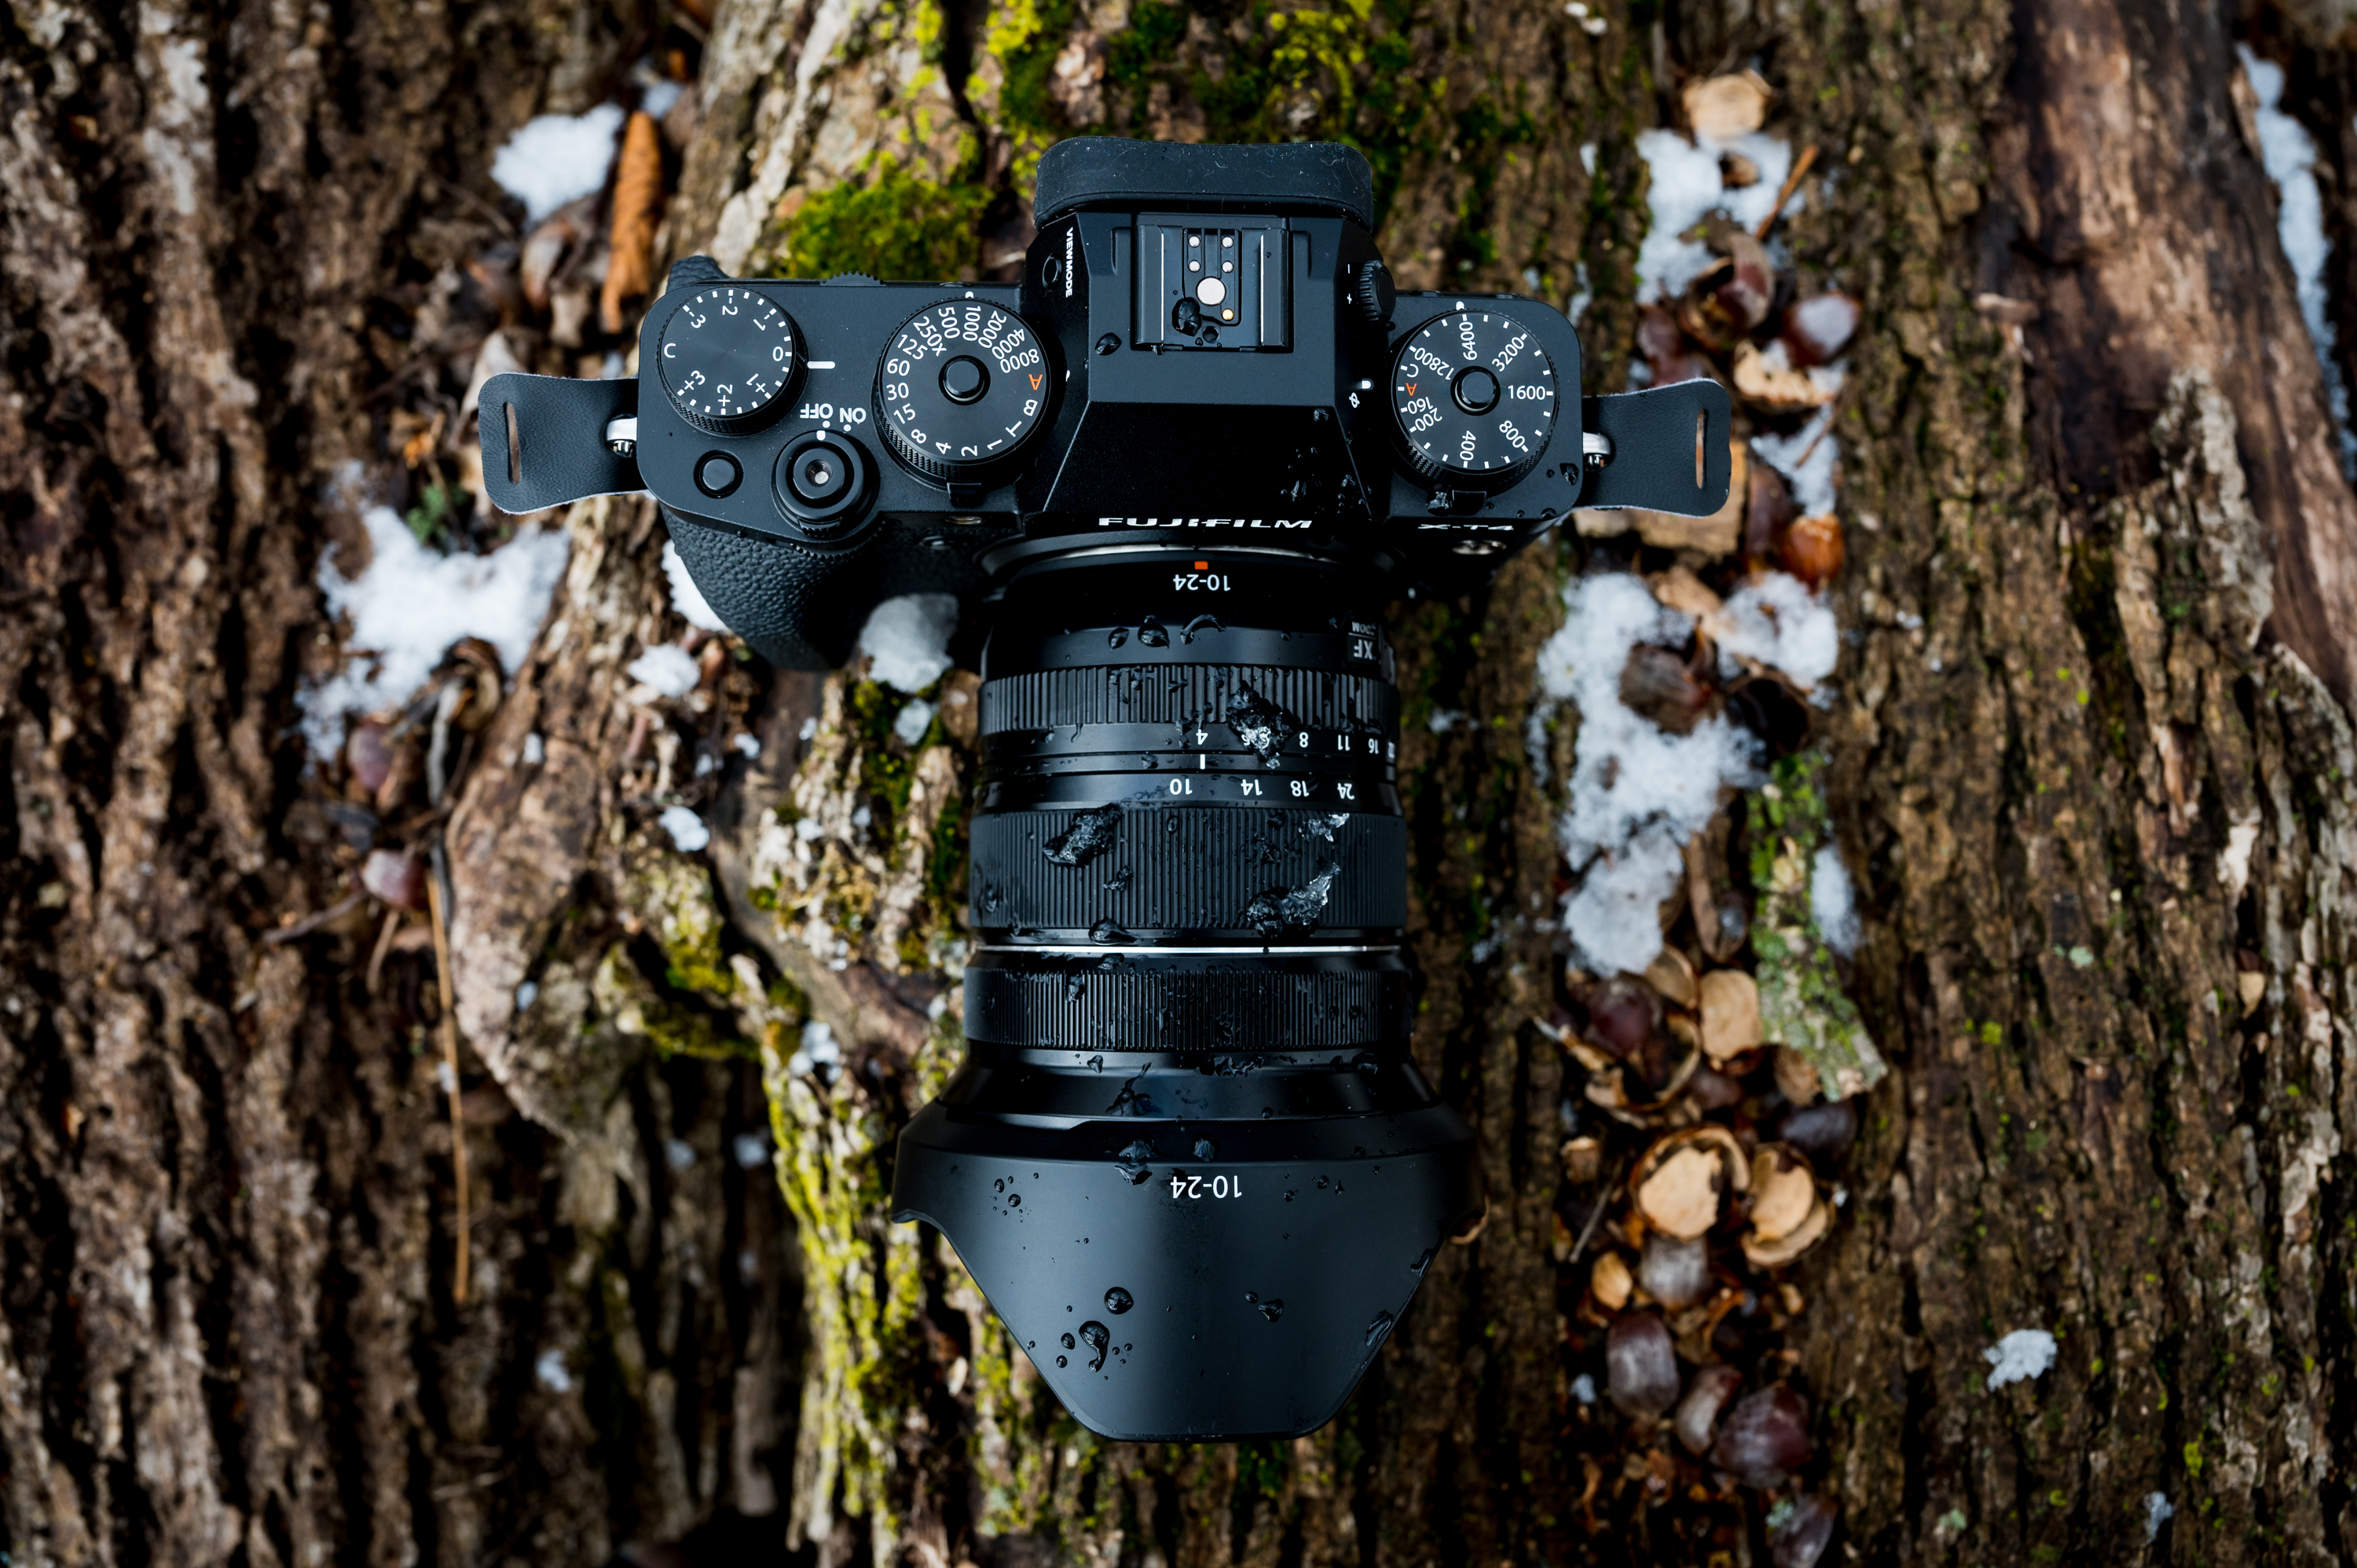 Real life experience of using Fujifilm XT4 X mount system as a